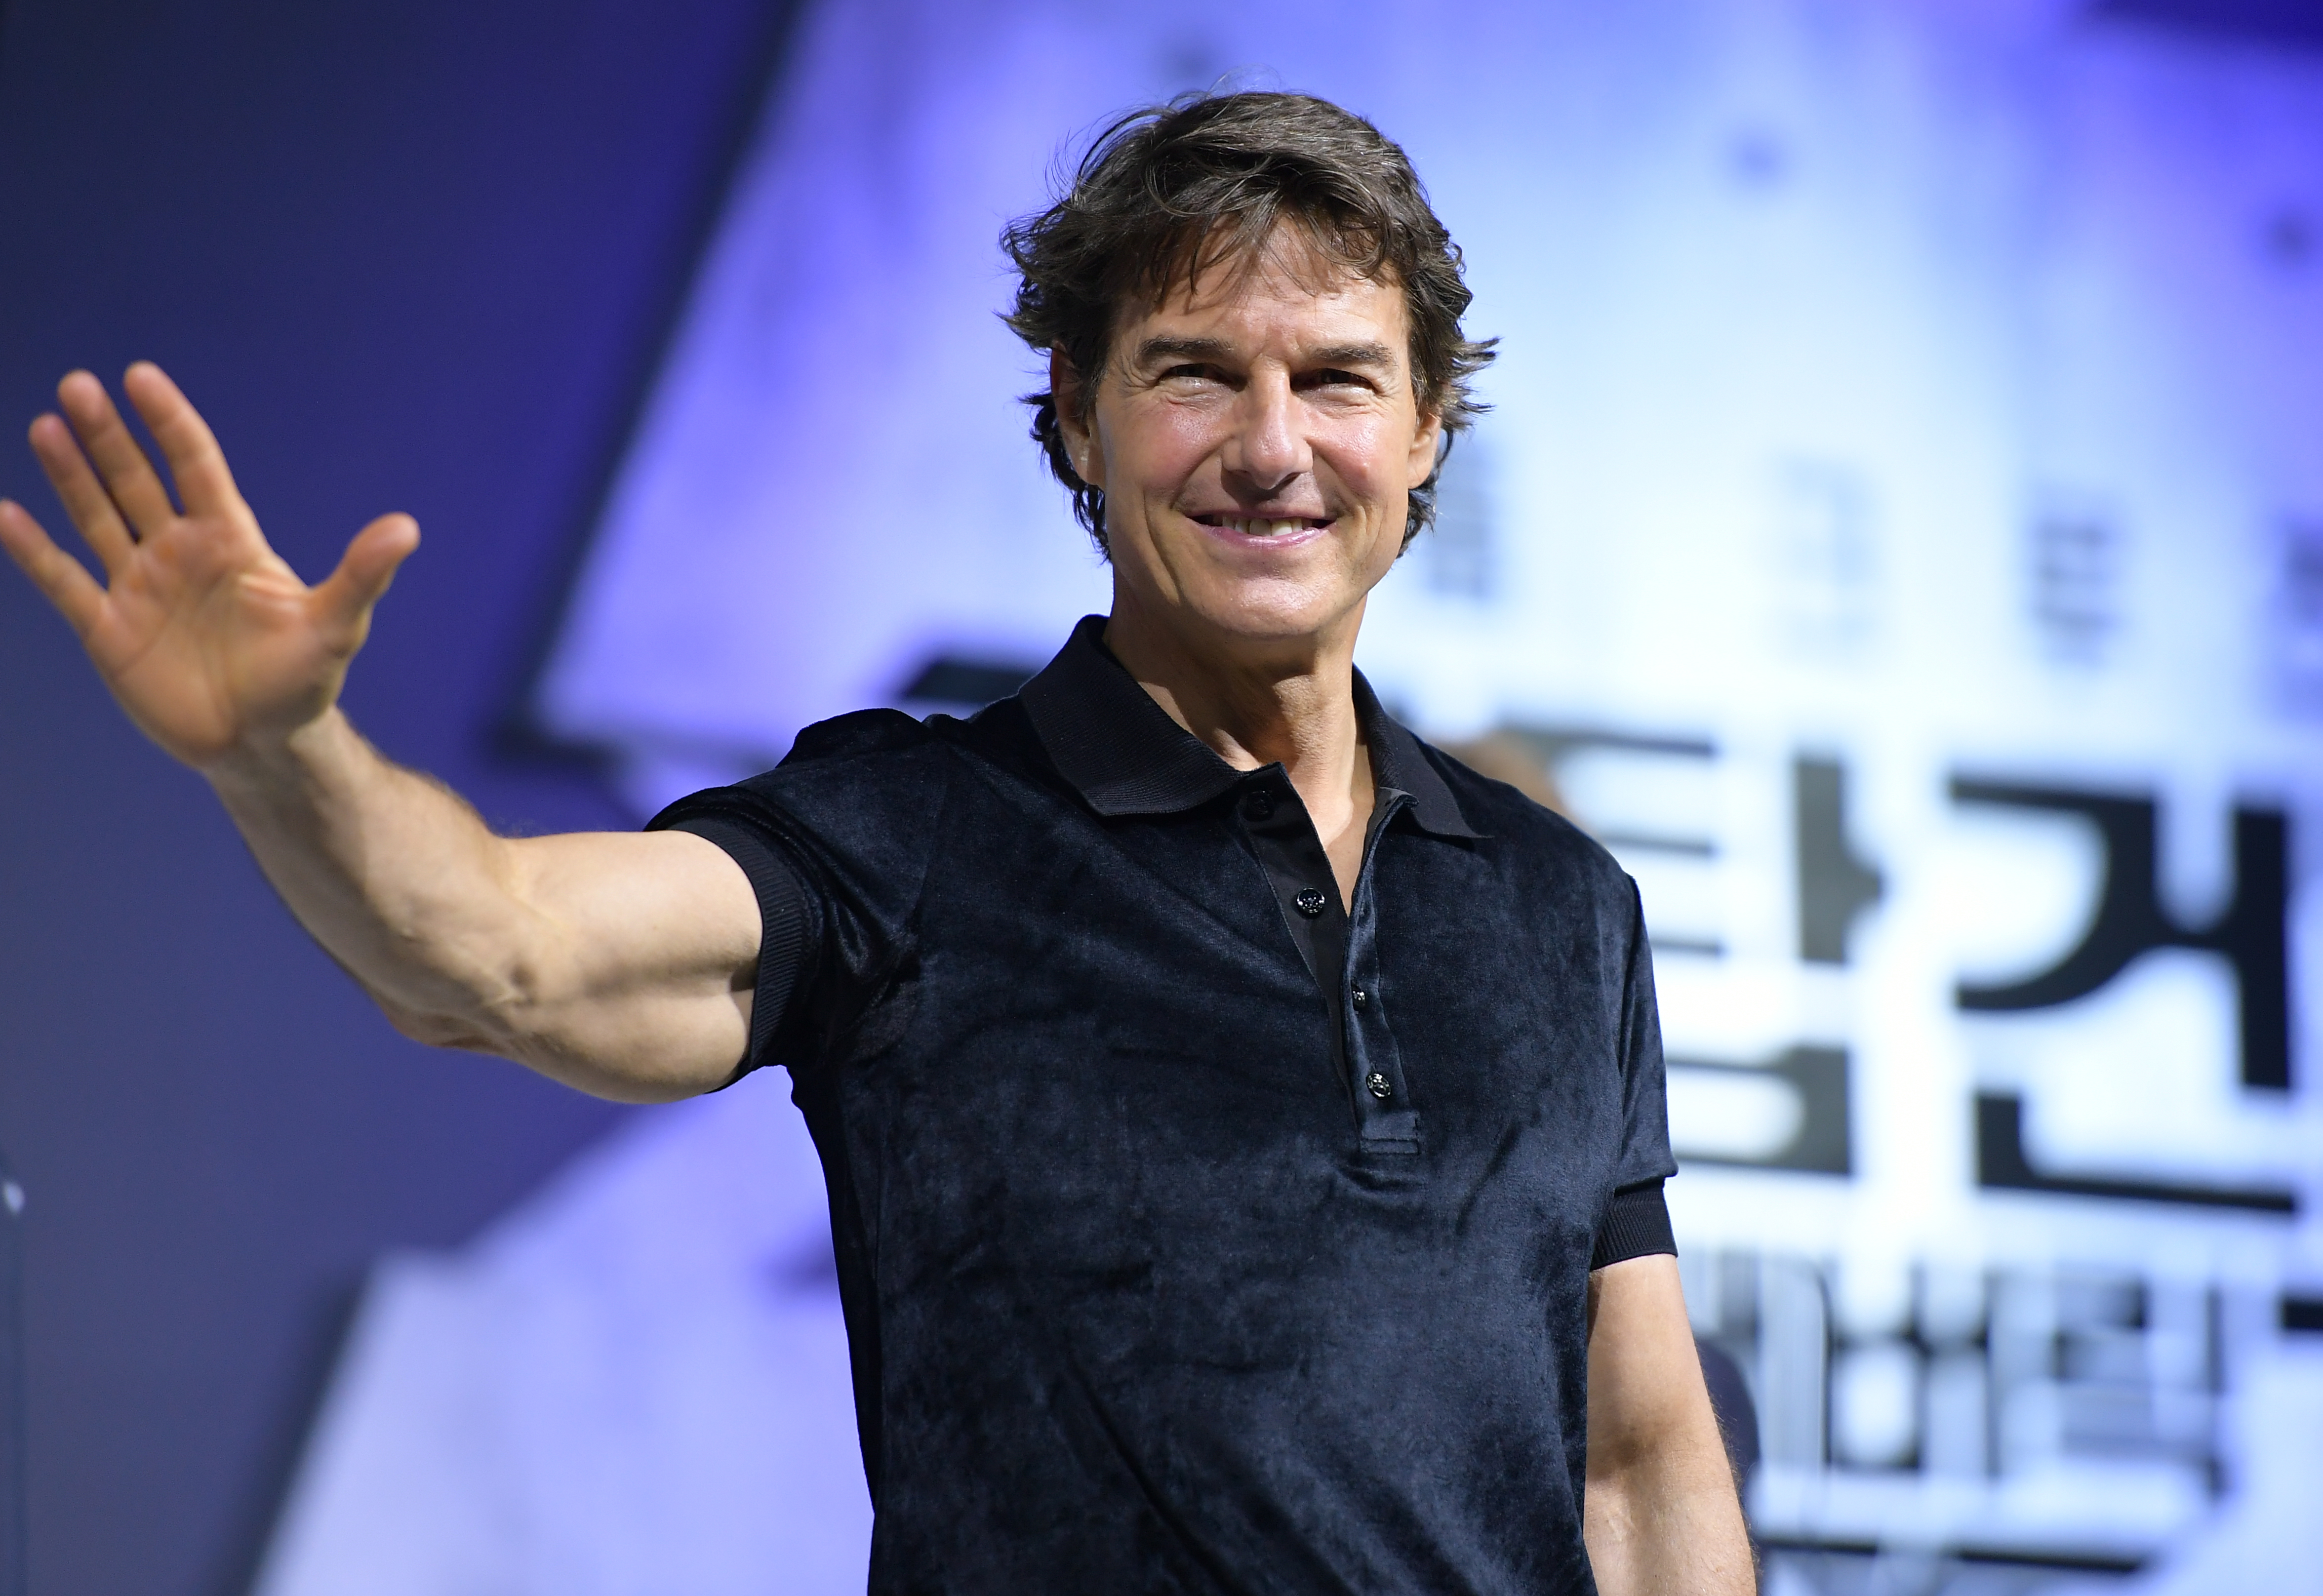 Tom Cruise during a press conference for the movie "Top Gun: Maverick" at Lotte Hotel World on June 20, 2022, in Seoul, South Korea | Source: Getty Images